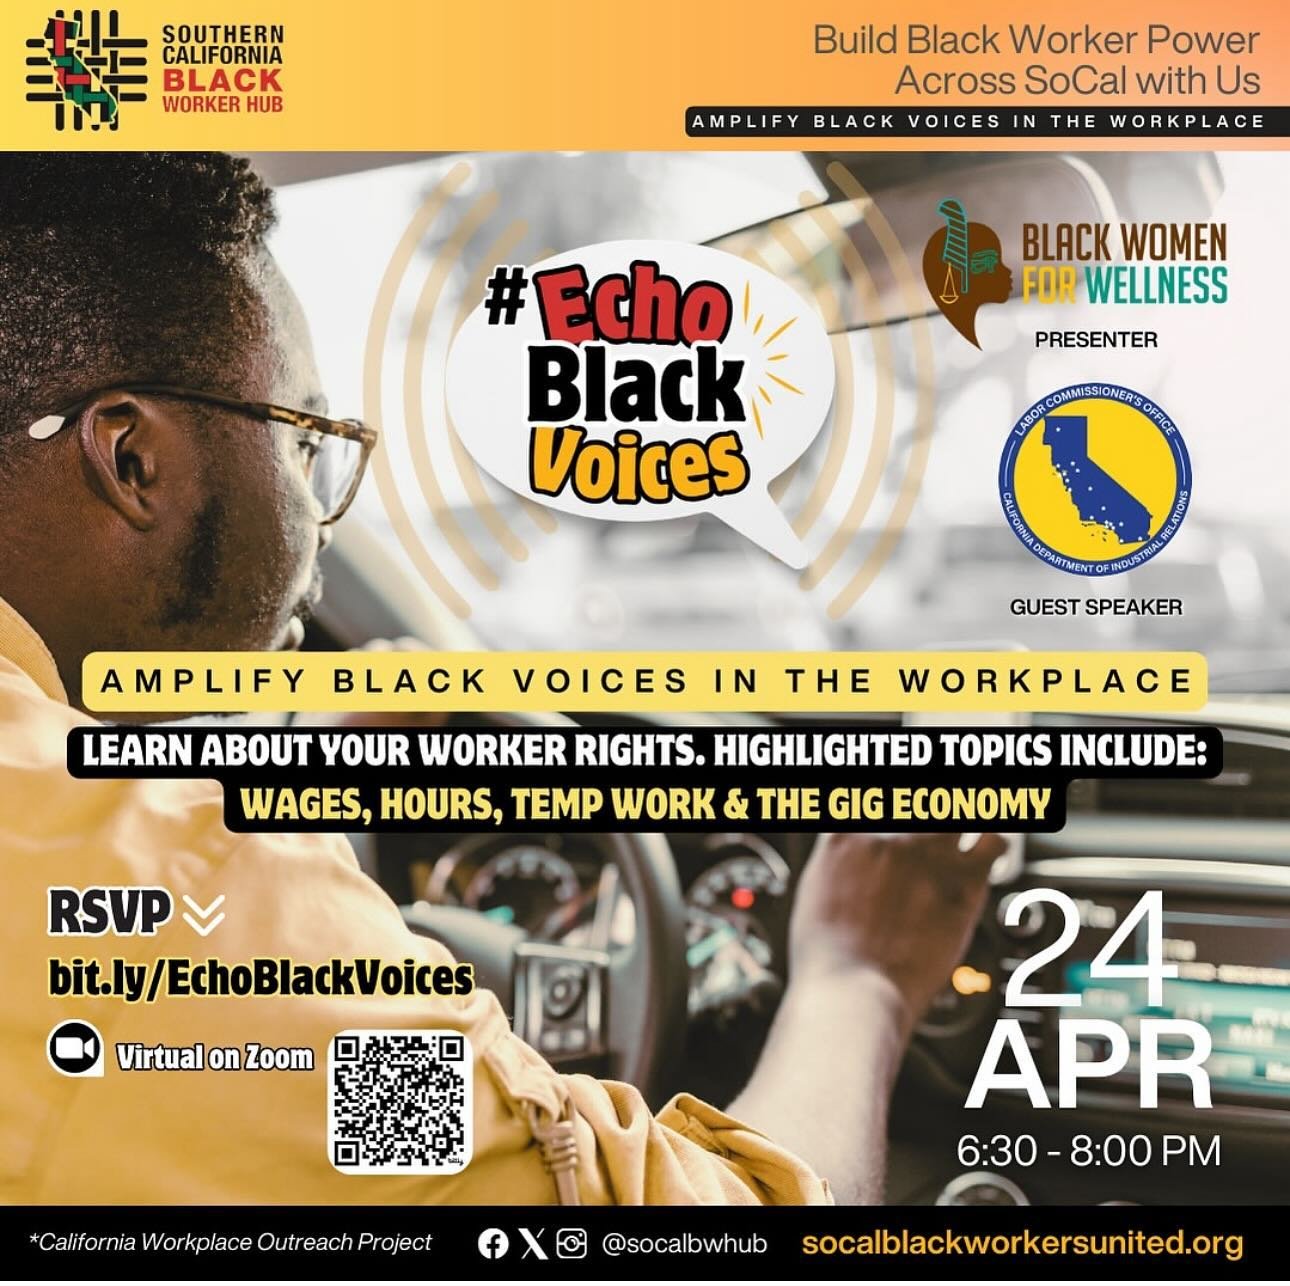 Join Black Women for Wellness, the Labor Commissioner&rsquo;s Office, and other Black workers Wednesday online at the #EchoBlackVoices Black Worker Power Building Edu-Series. Zoom with the @socalbwhub tomorrow, Wednesday, April 24th from 6:30pm - 8:0